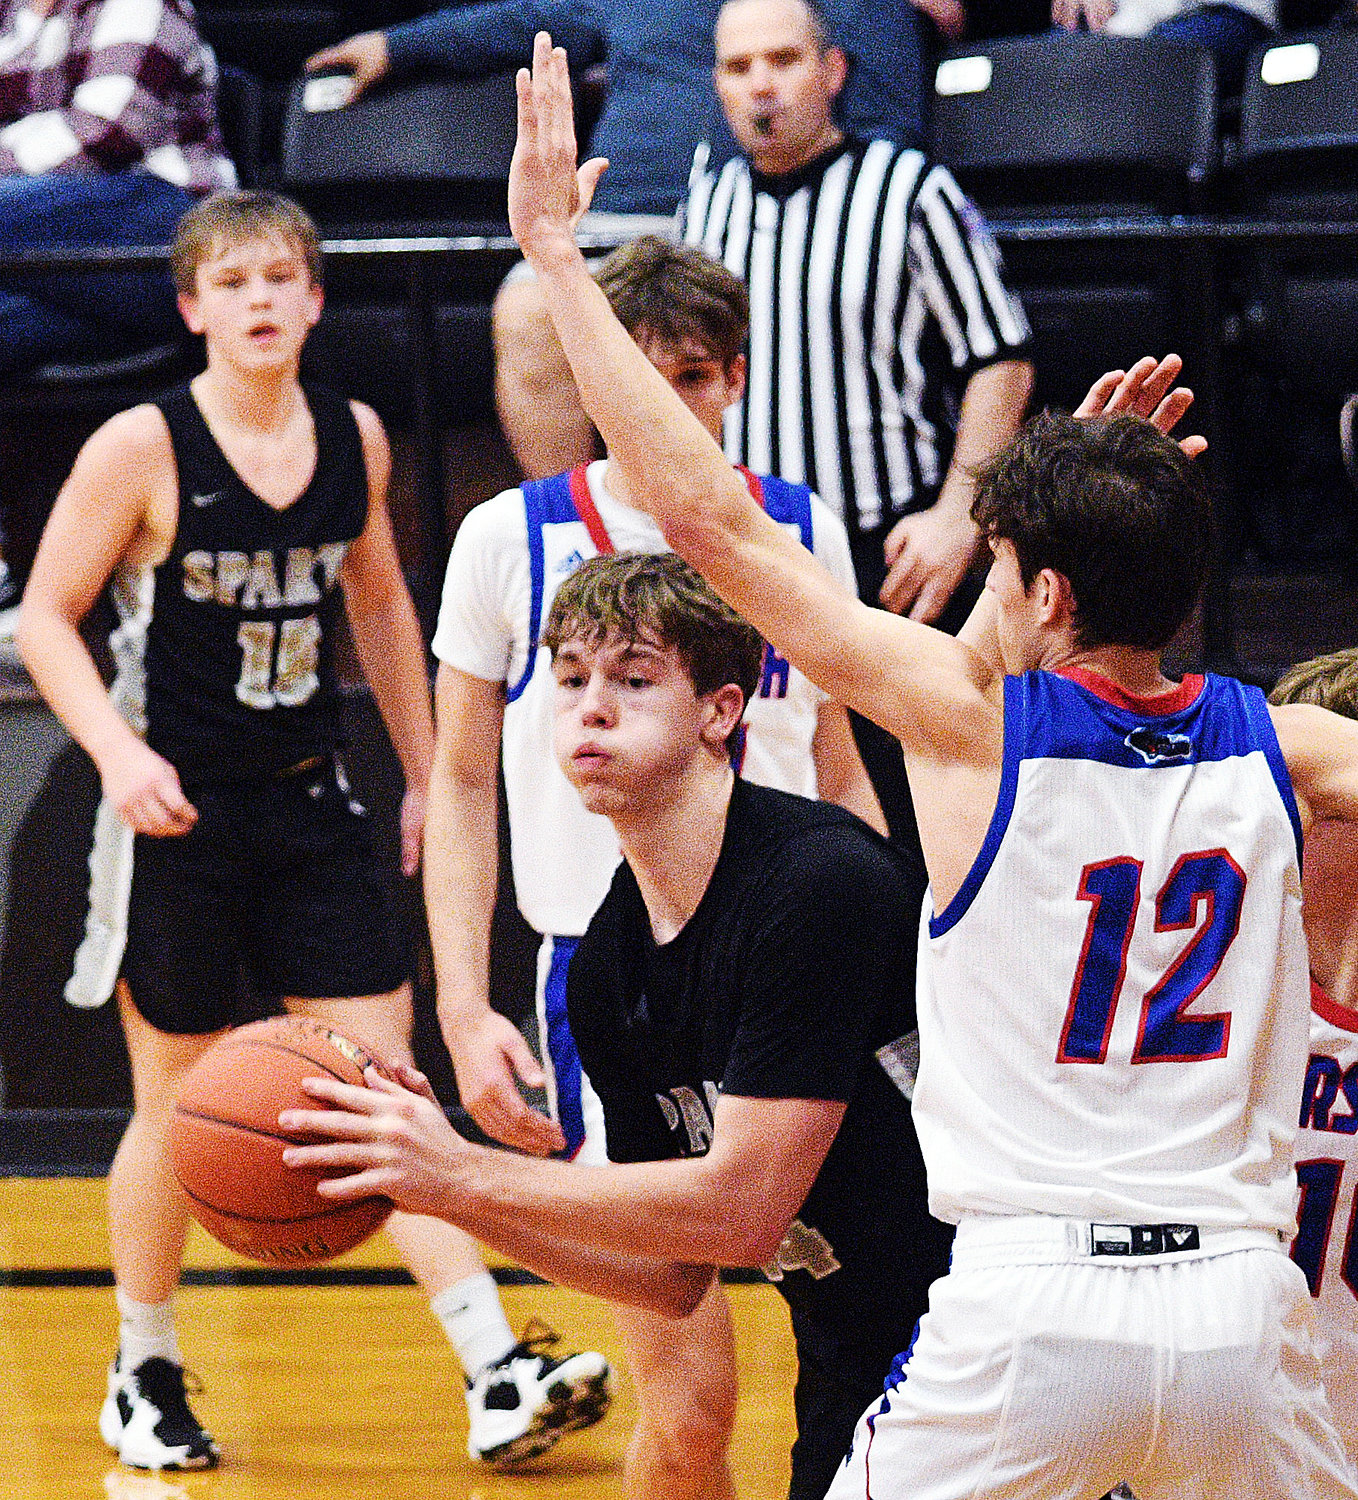 SPARTA'S JACOB LAFFERTY and the Trojans play Mansfield at 5:30 p.m. at the Sparta Tournament on Tuesday.